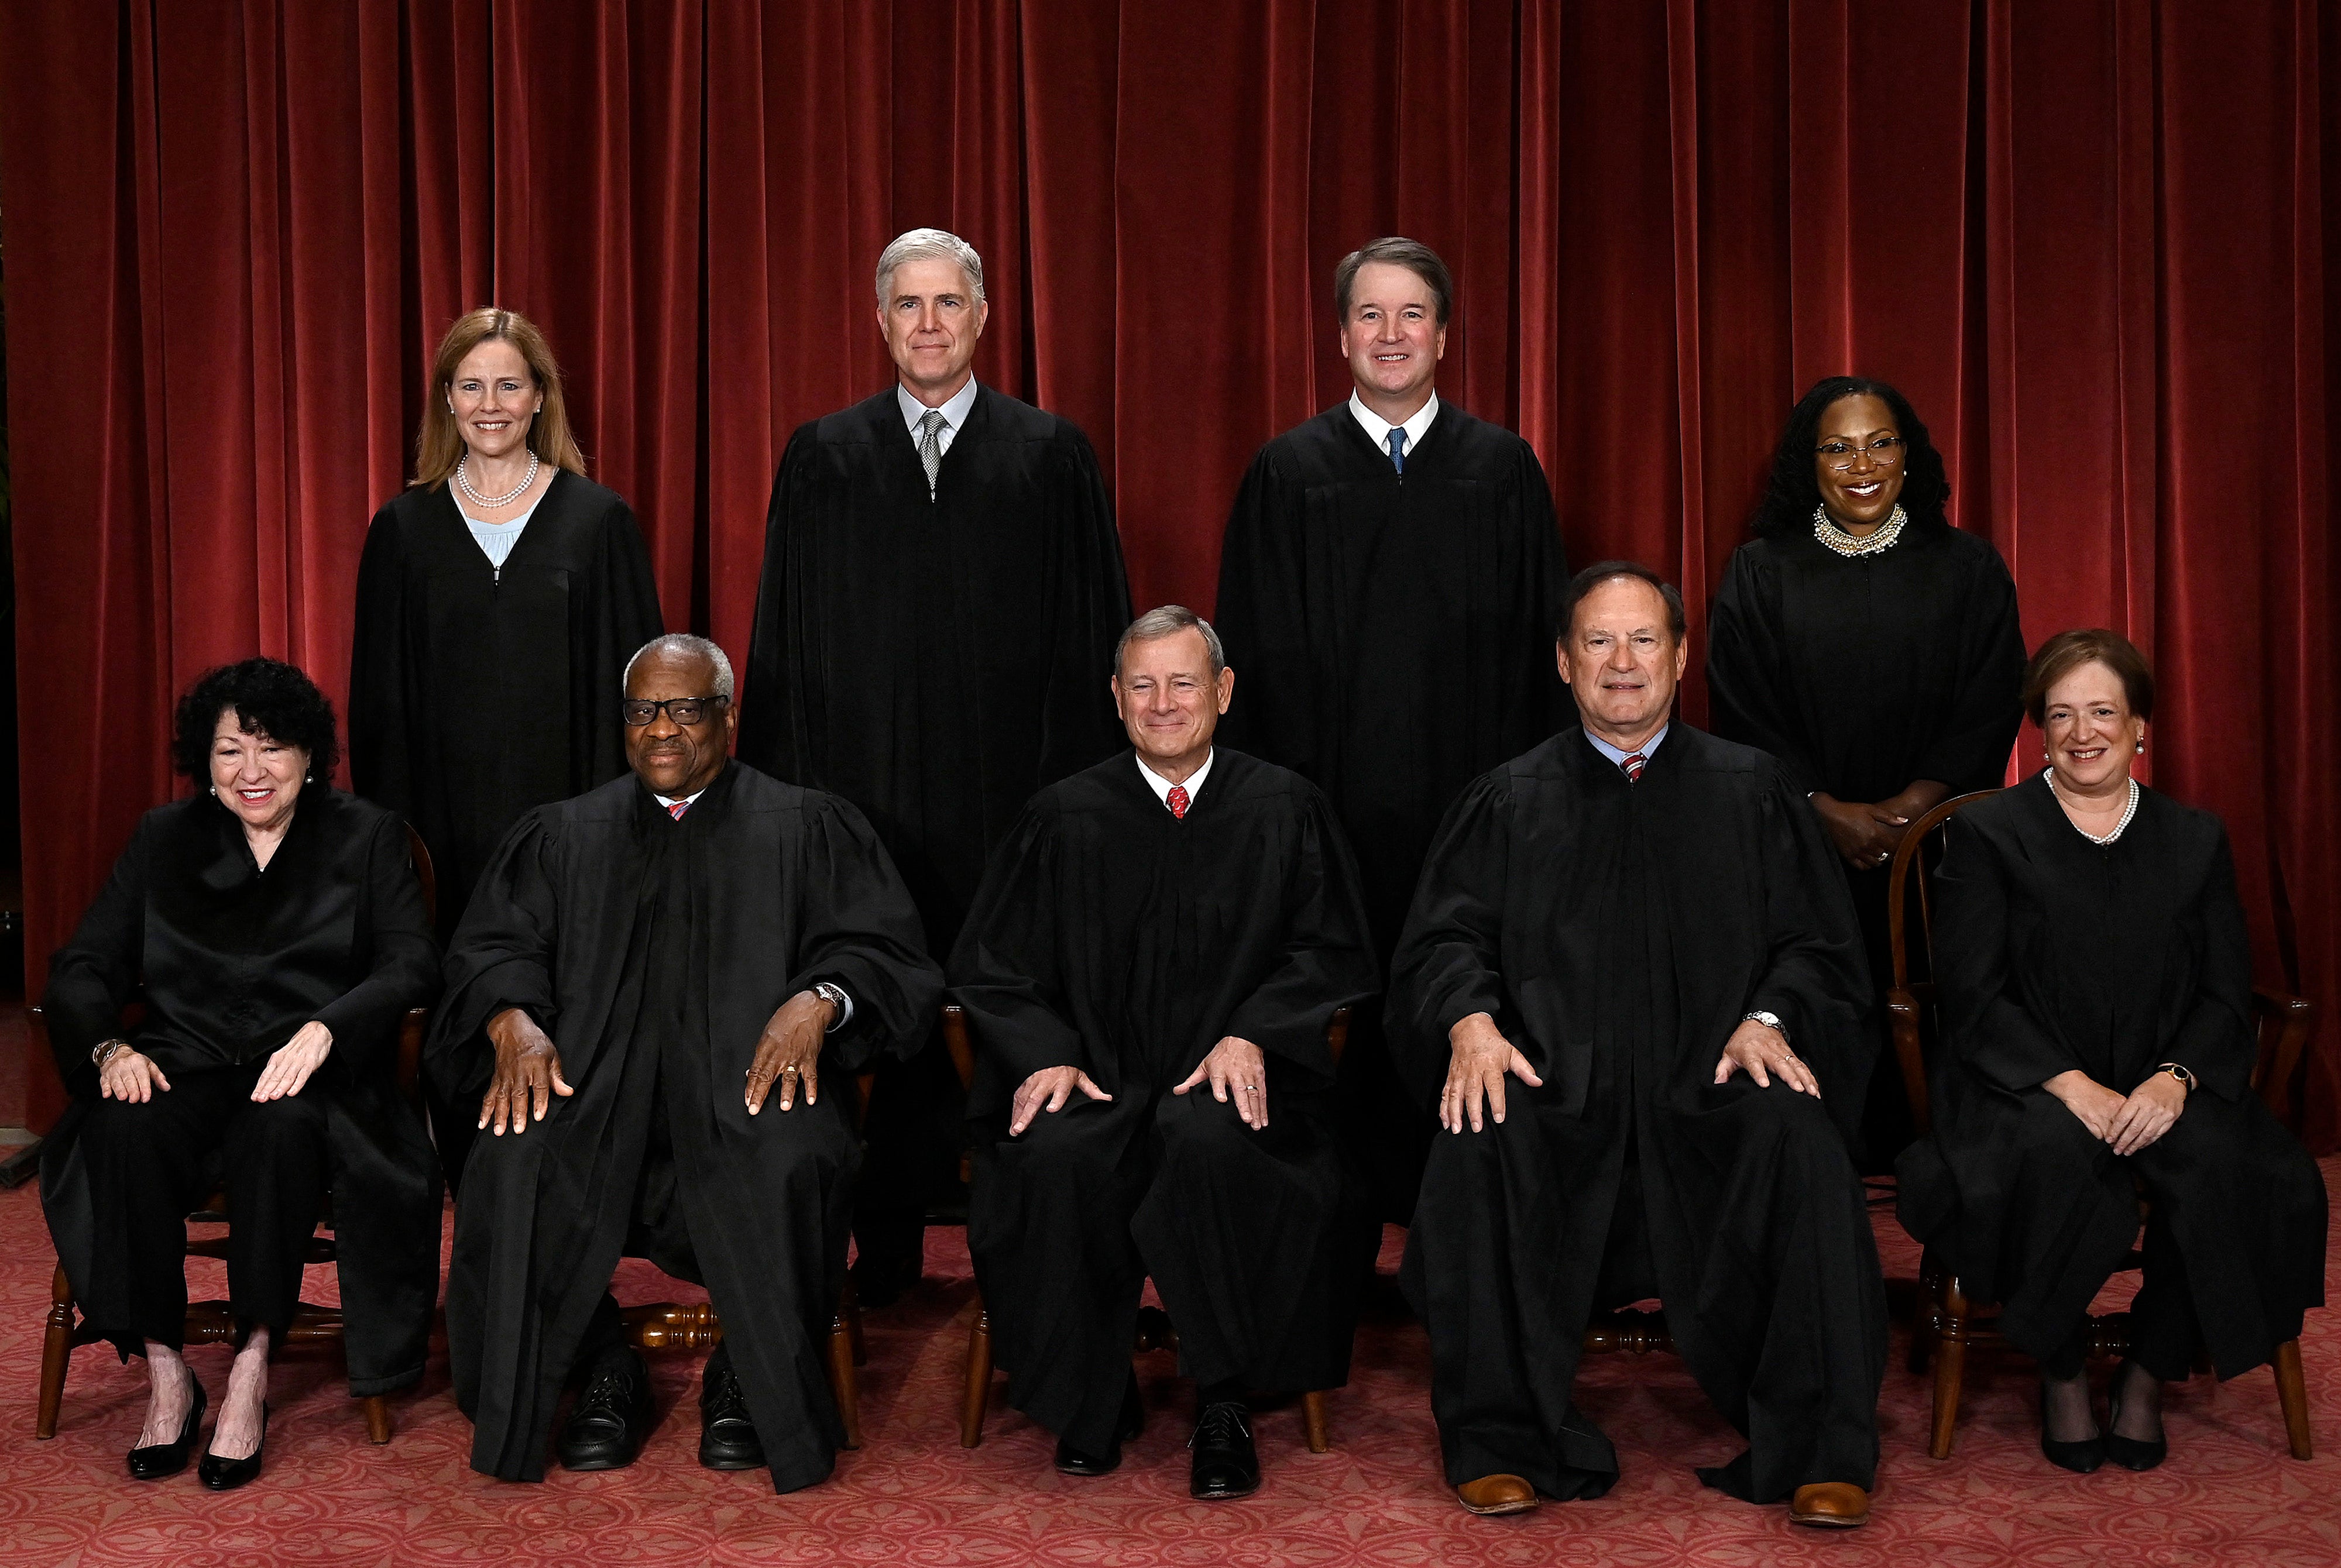 Justices of the US Supreme Court pose for their official photo at the Supreme Court in Washington, DC on October 7, 2022. (Seated from left) Associate Justice Sonia Sotomayor, Associate Justice Clarence Thomas, Chief Justice John Roberts, Associate Justice Samuel Alito and Associate Justice Elena Kagan, (Standing behind from left) Associate Justice Amy Coney Barrett, Associate Justice Neil Gorsuch, Associate Justice Brett Kavanaugh and Associate Justice Ketanji Brown Jackson